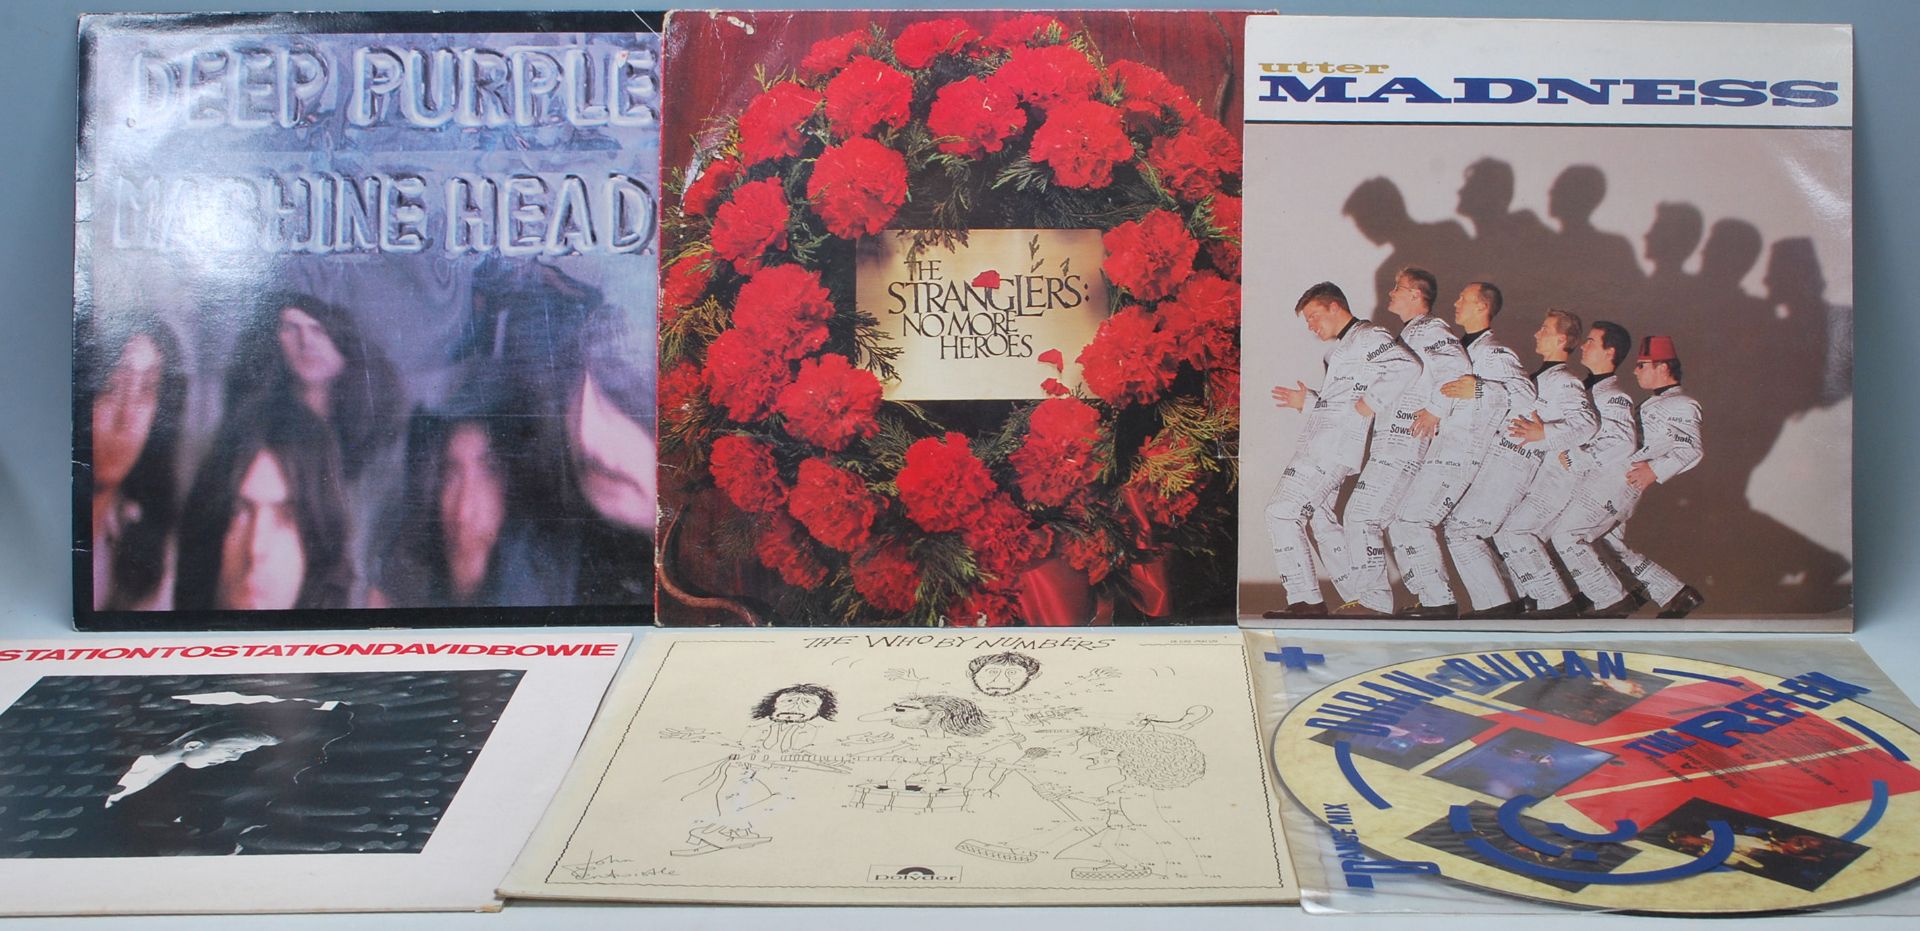 A large collection of vintage vinyl LPs from the 60's, 70s, 80s & 90s to include Emerson Lake &